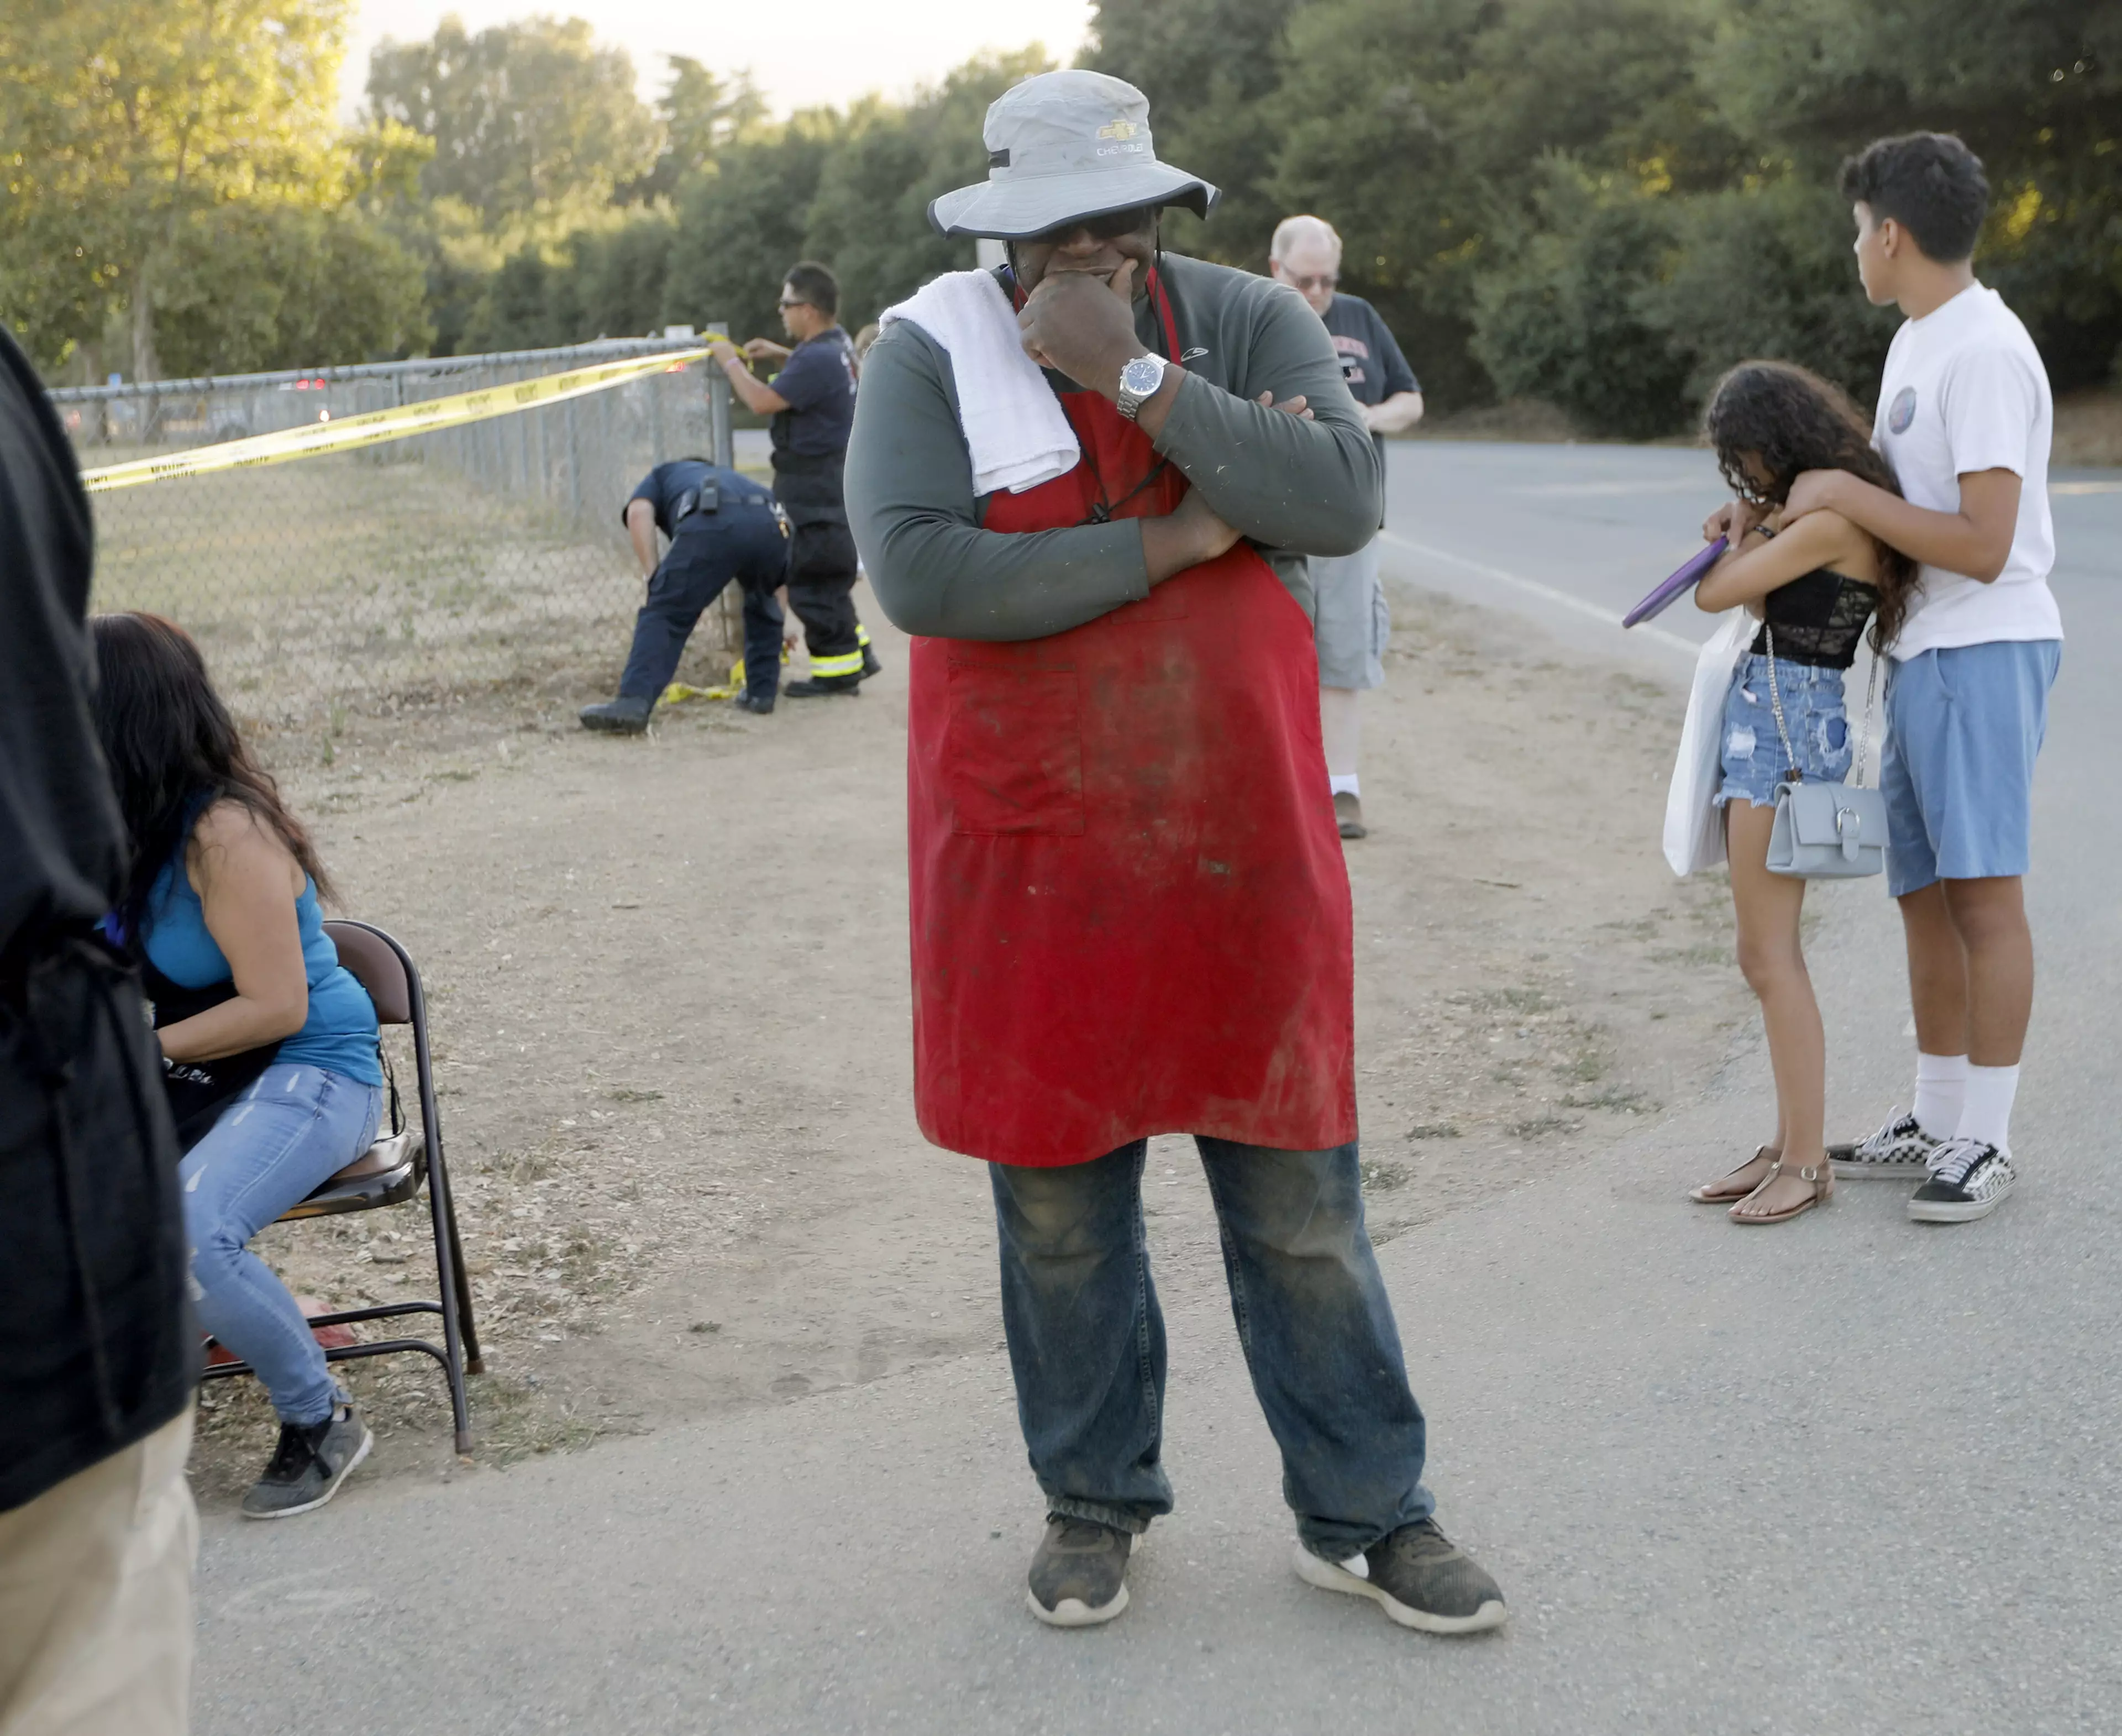 At least three people have been killed in a shooting at Gilroy Garlic Festival.